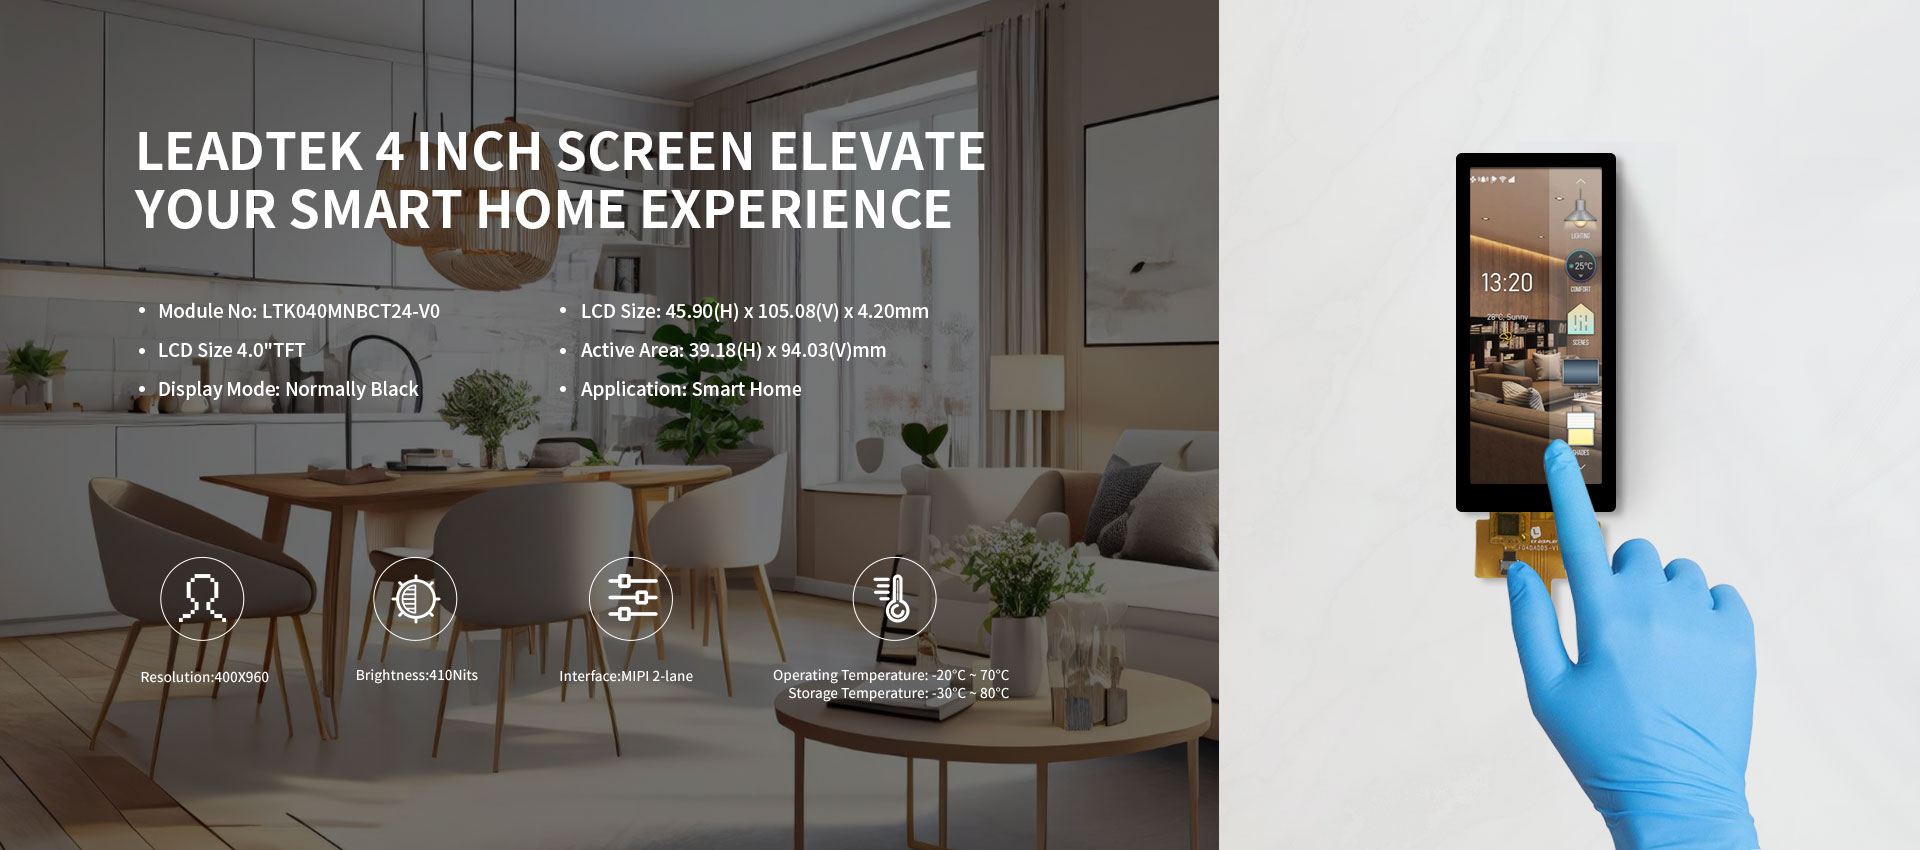 4 inch screen elevate your smart home experience